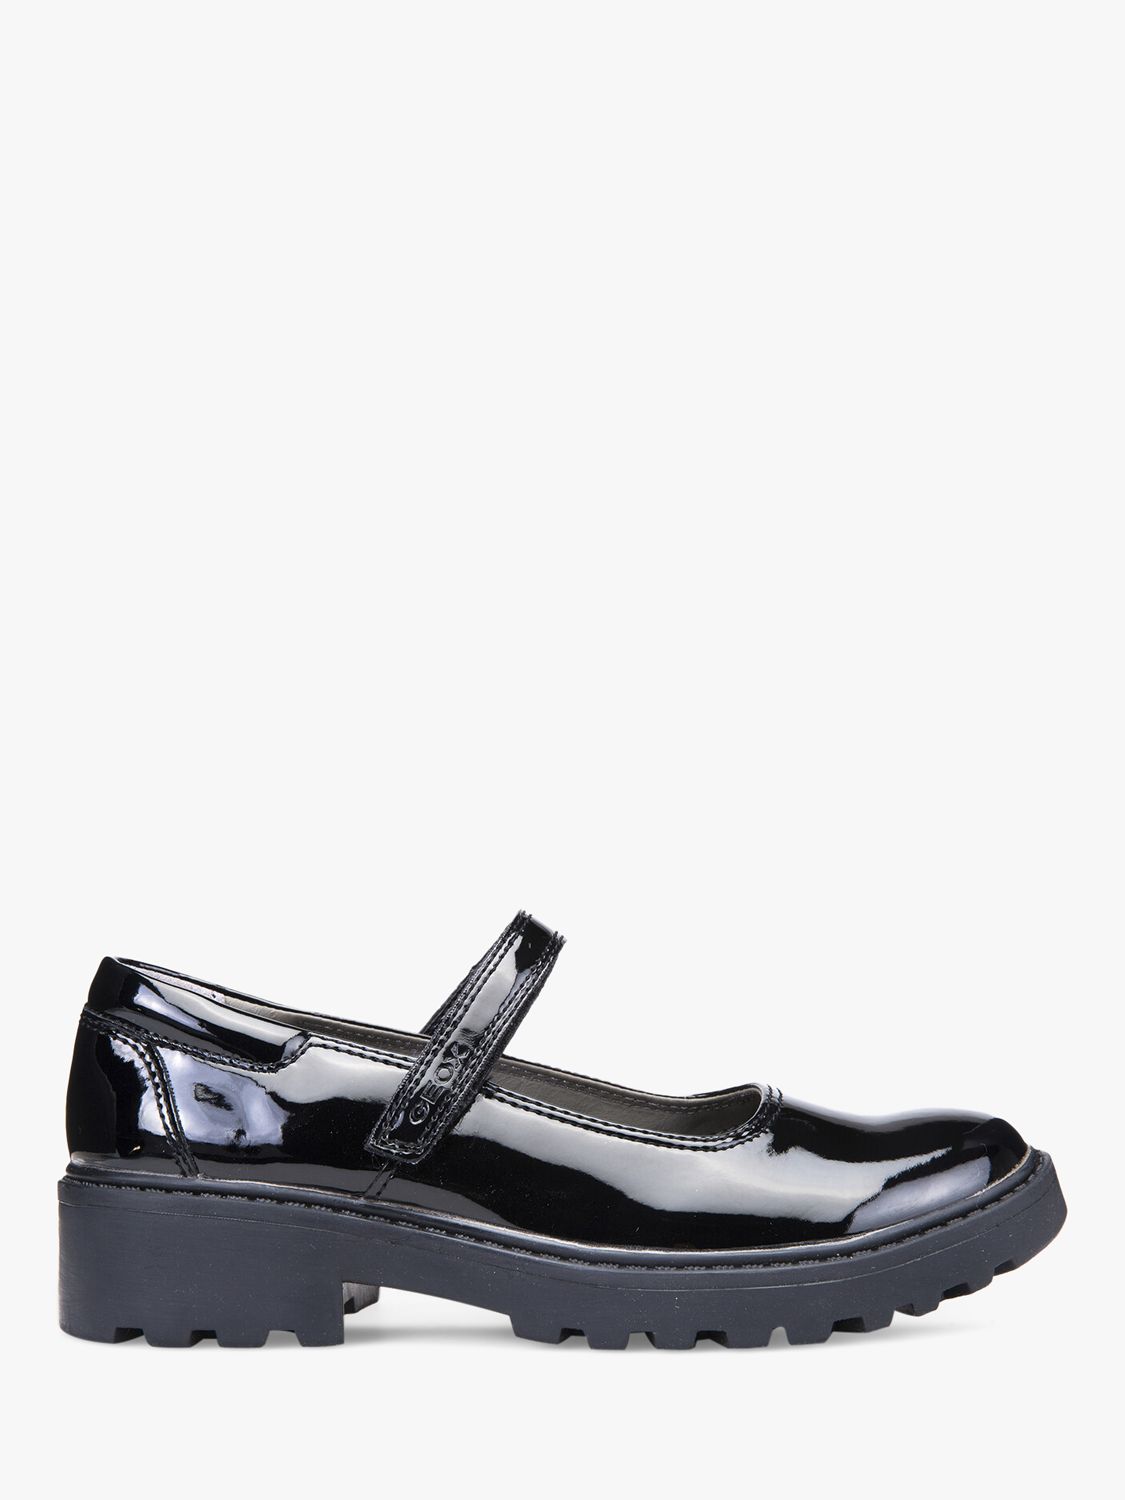 Geox Kids' Casey MJ Leather School Shoes, Black Patent at John Lewis &